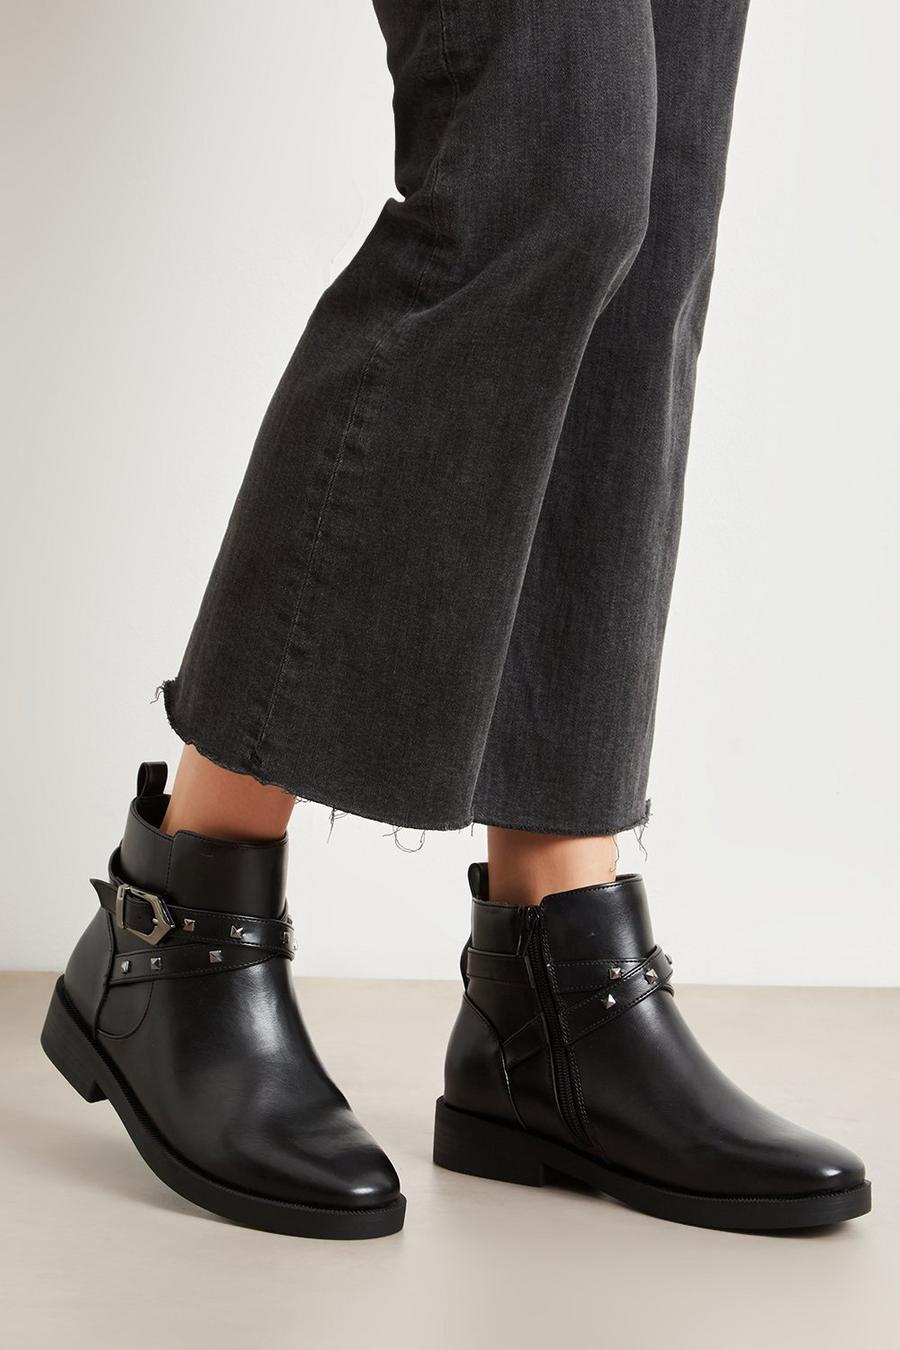 Good For The Sole: Maisie Comfort Wrap Strap Ankle Boot